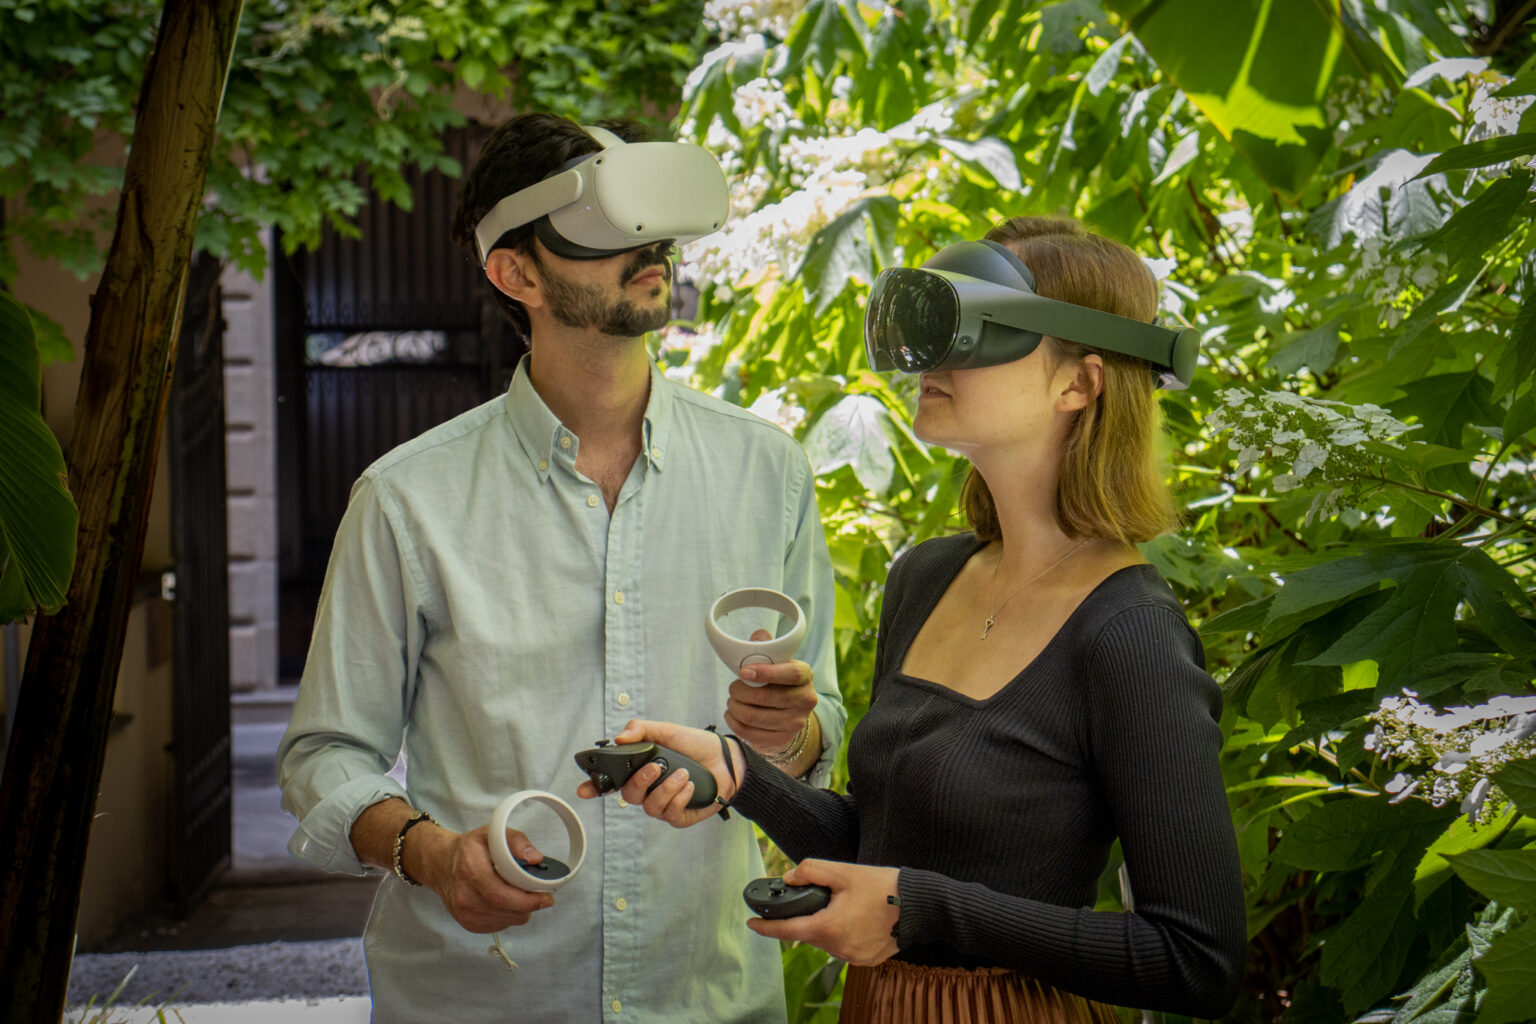 Team members with VR headsets in a garden, engaging with virtual content in a lush setting.